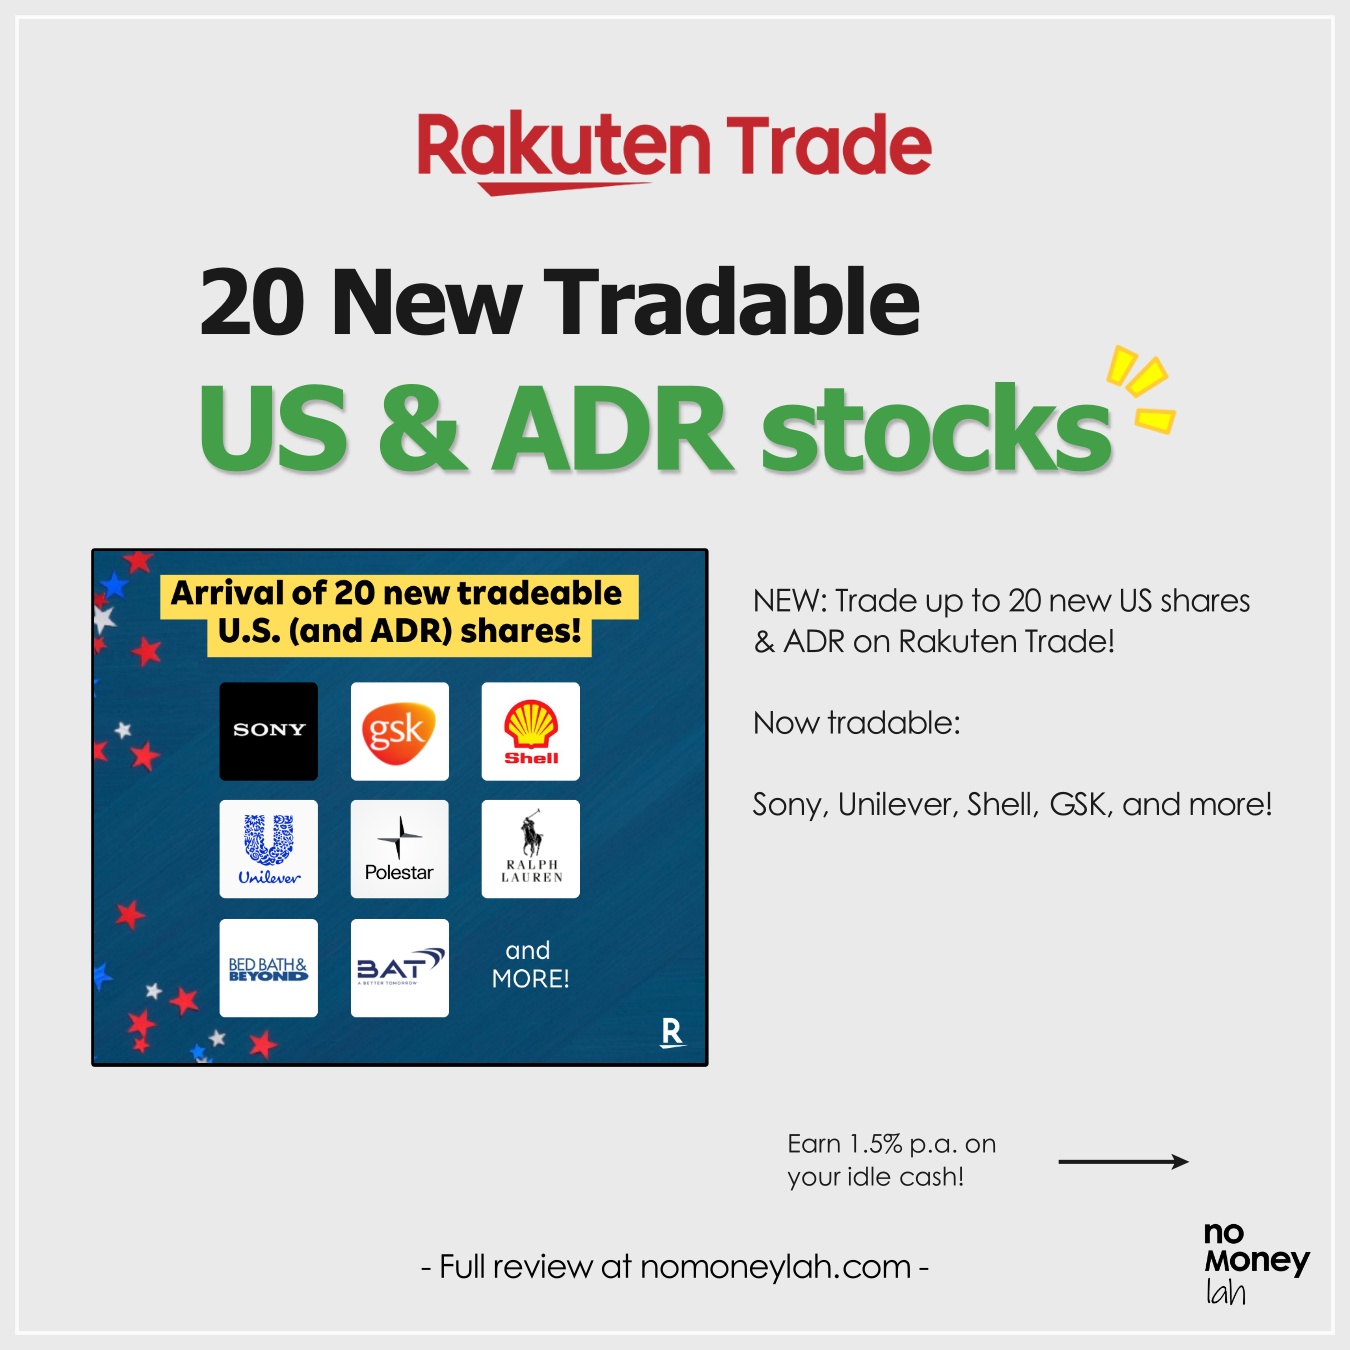 Rakuten Trade continues to add new tradable US shares & ADRs with time.